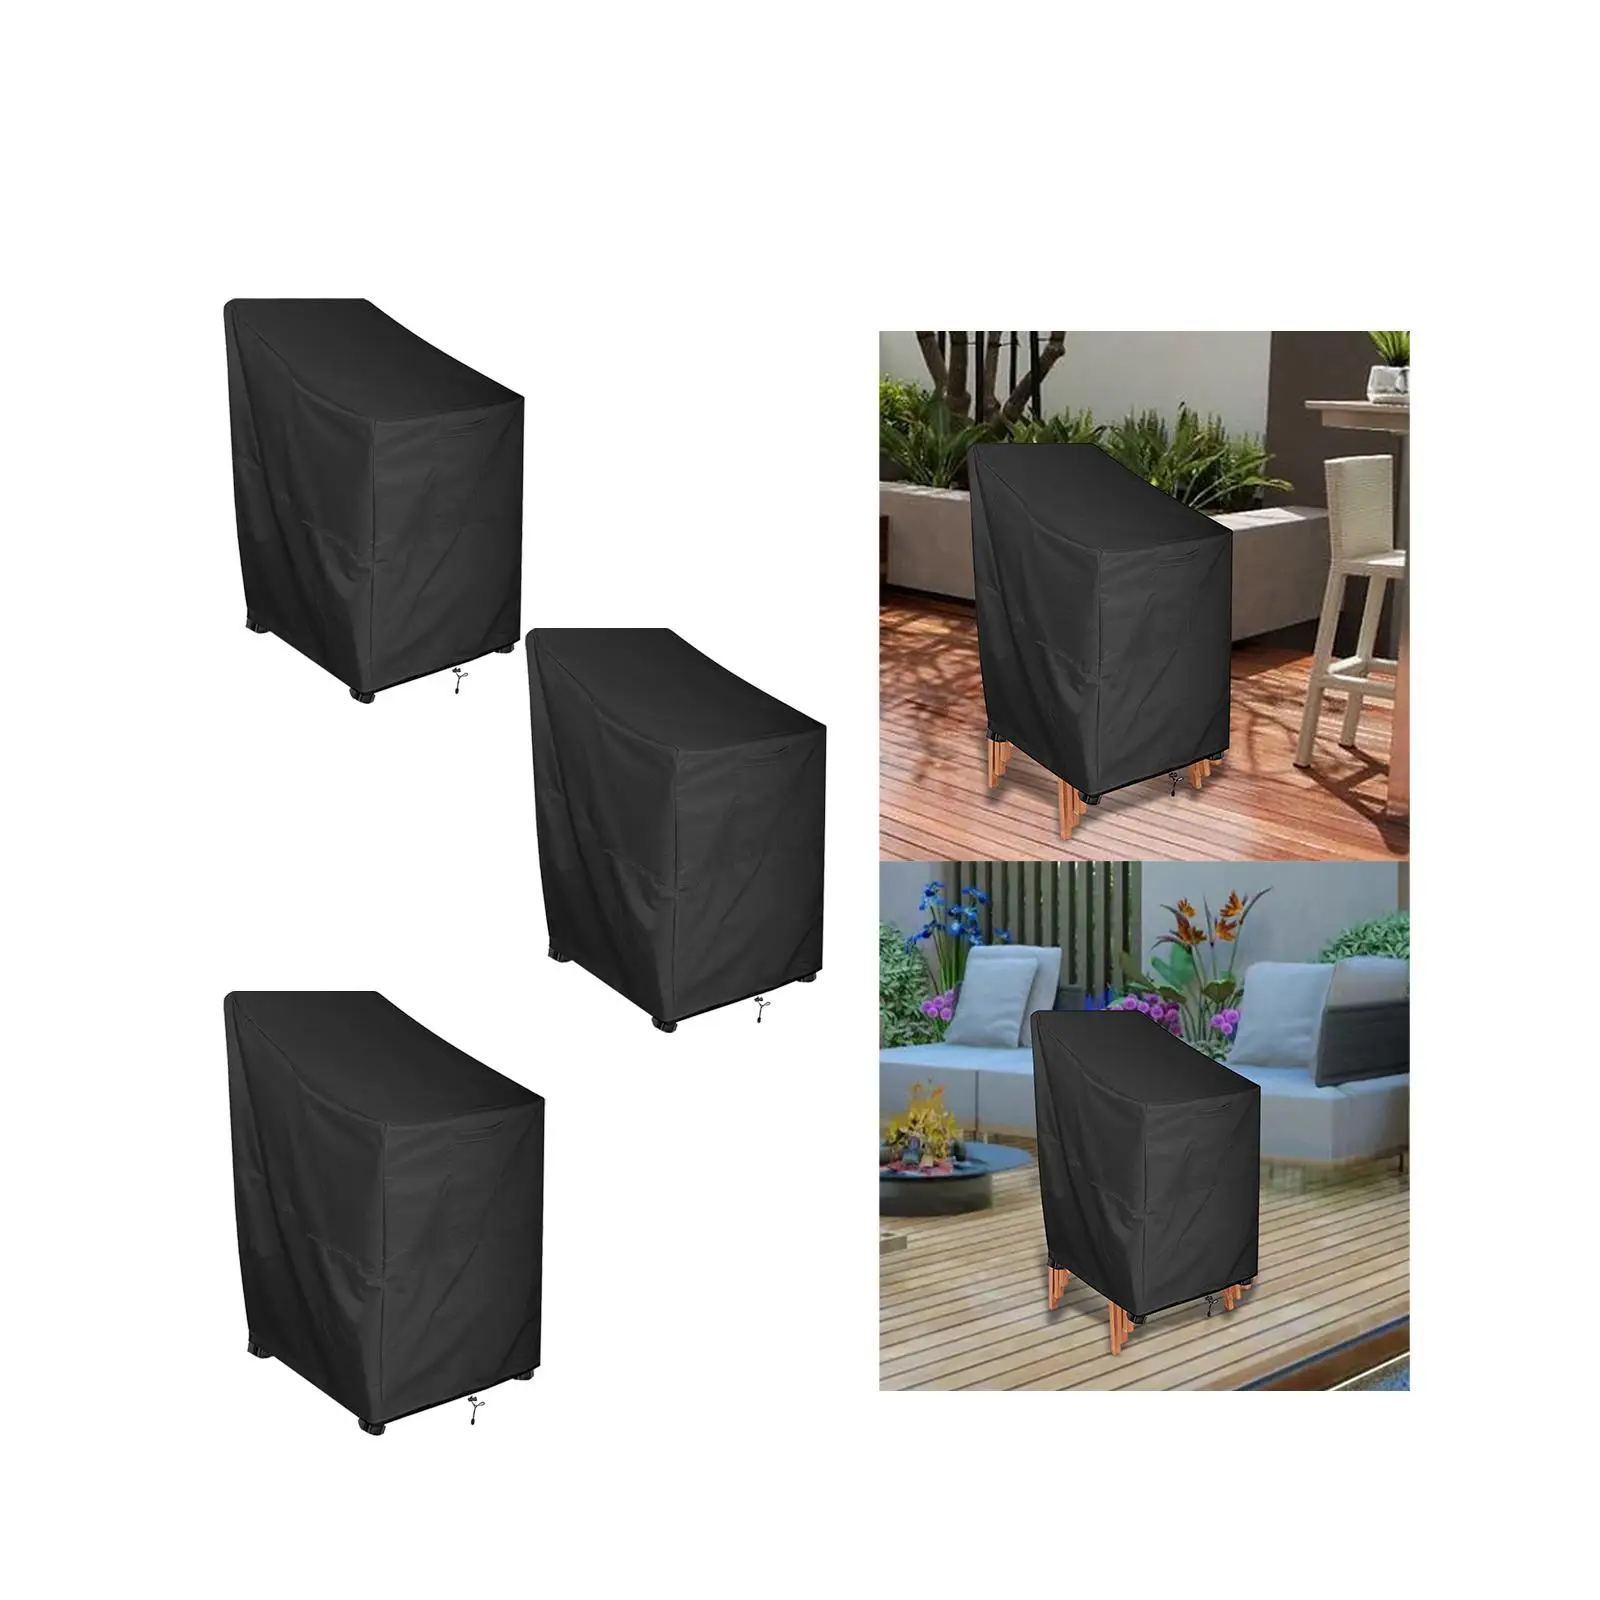 Folding Chairs Cover Durable Waterproof Dustproof Garden Patio Chair Cover